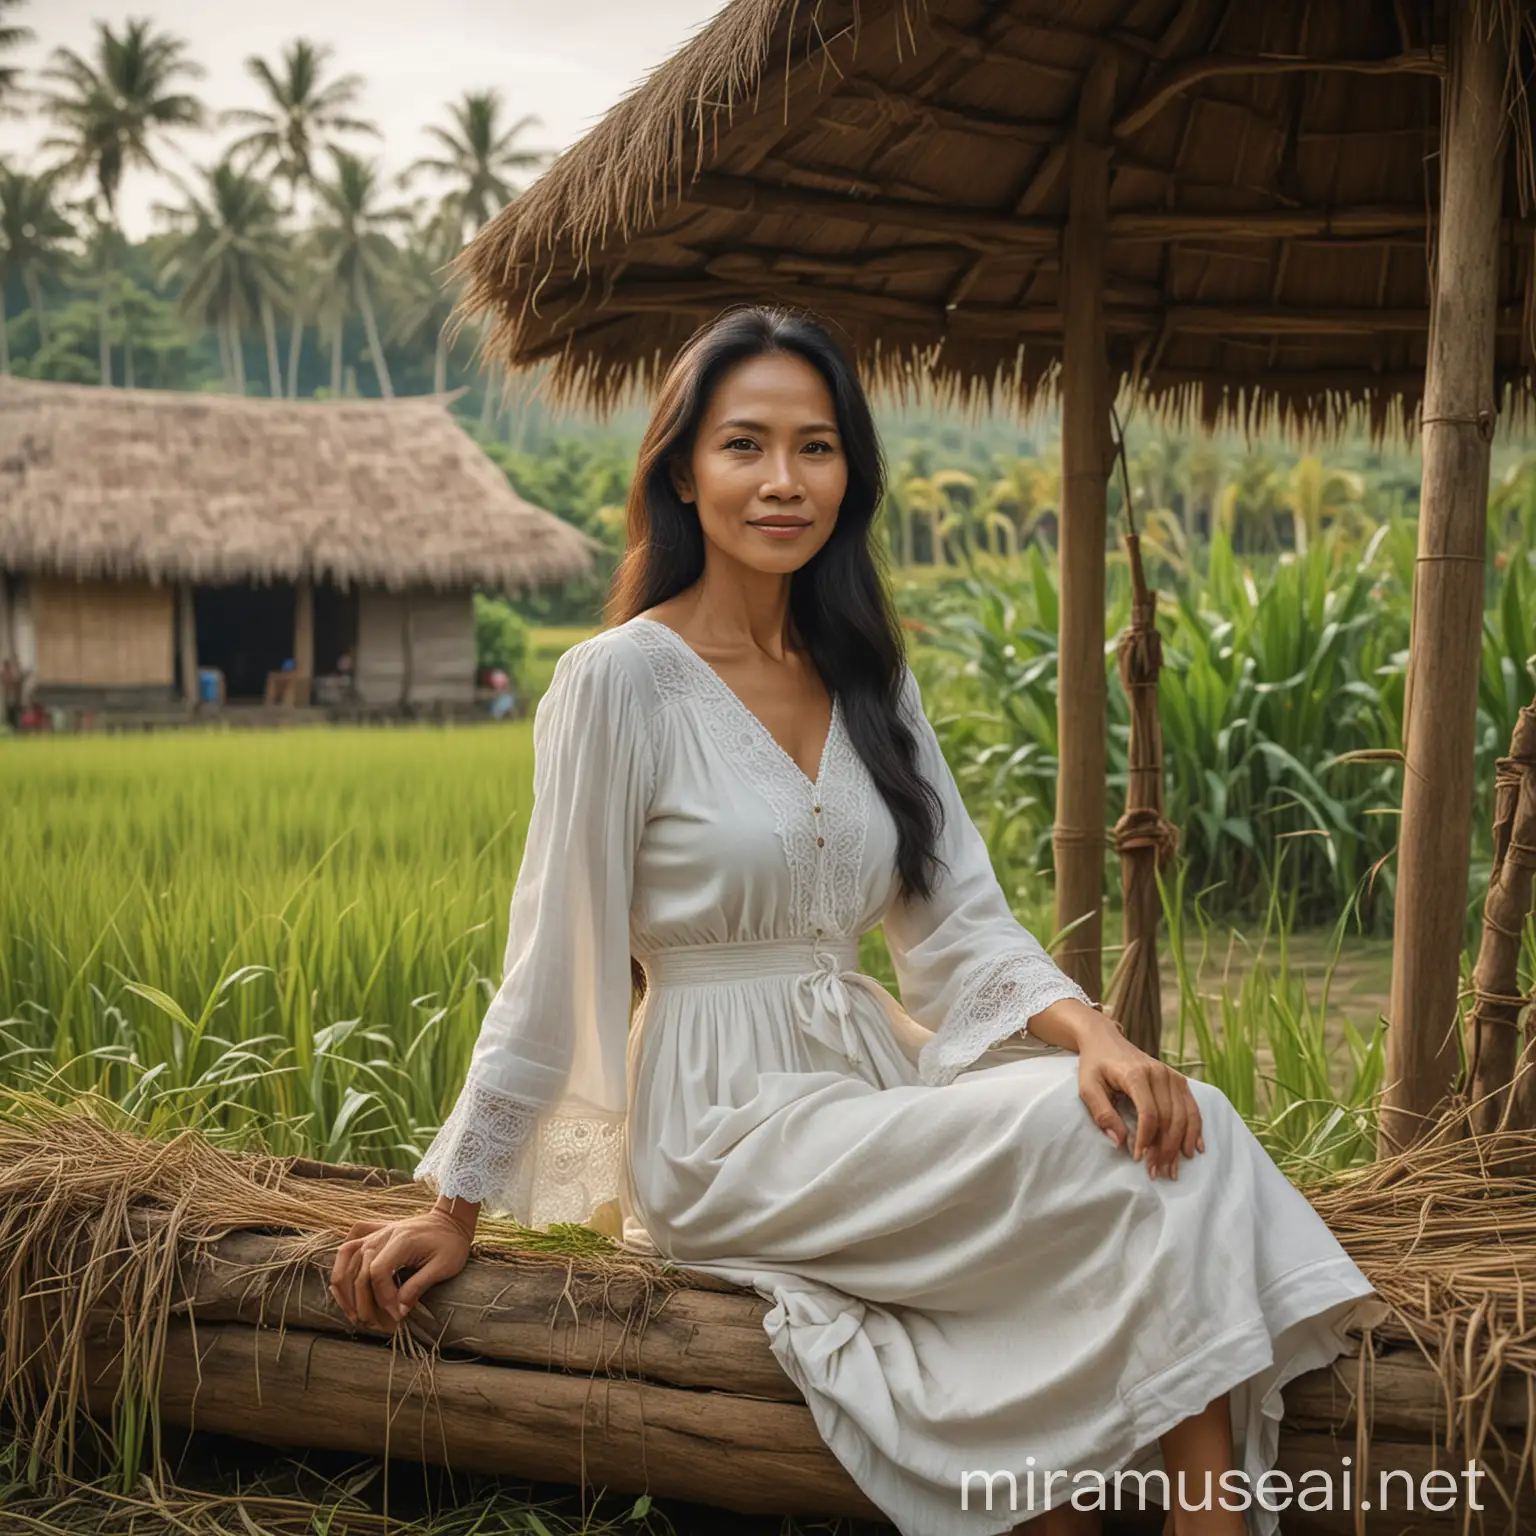 very clear realistic full hd 8 k photo
an Indonesian woman in her 50s with beautiful long hair wearing a white dress sitting in a hut in front of a paddy field
realistic natural color photo